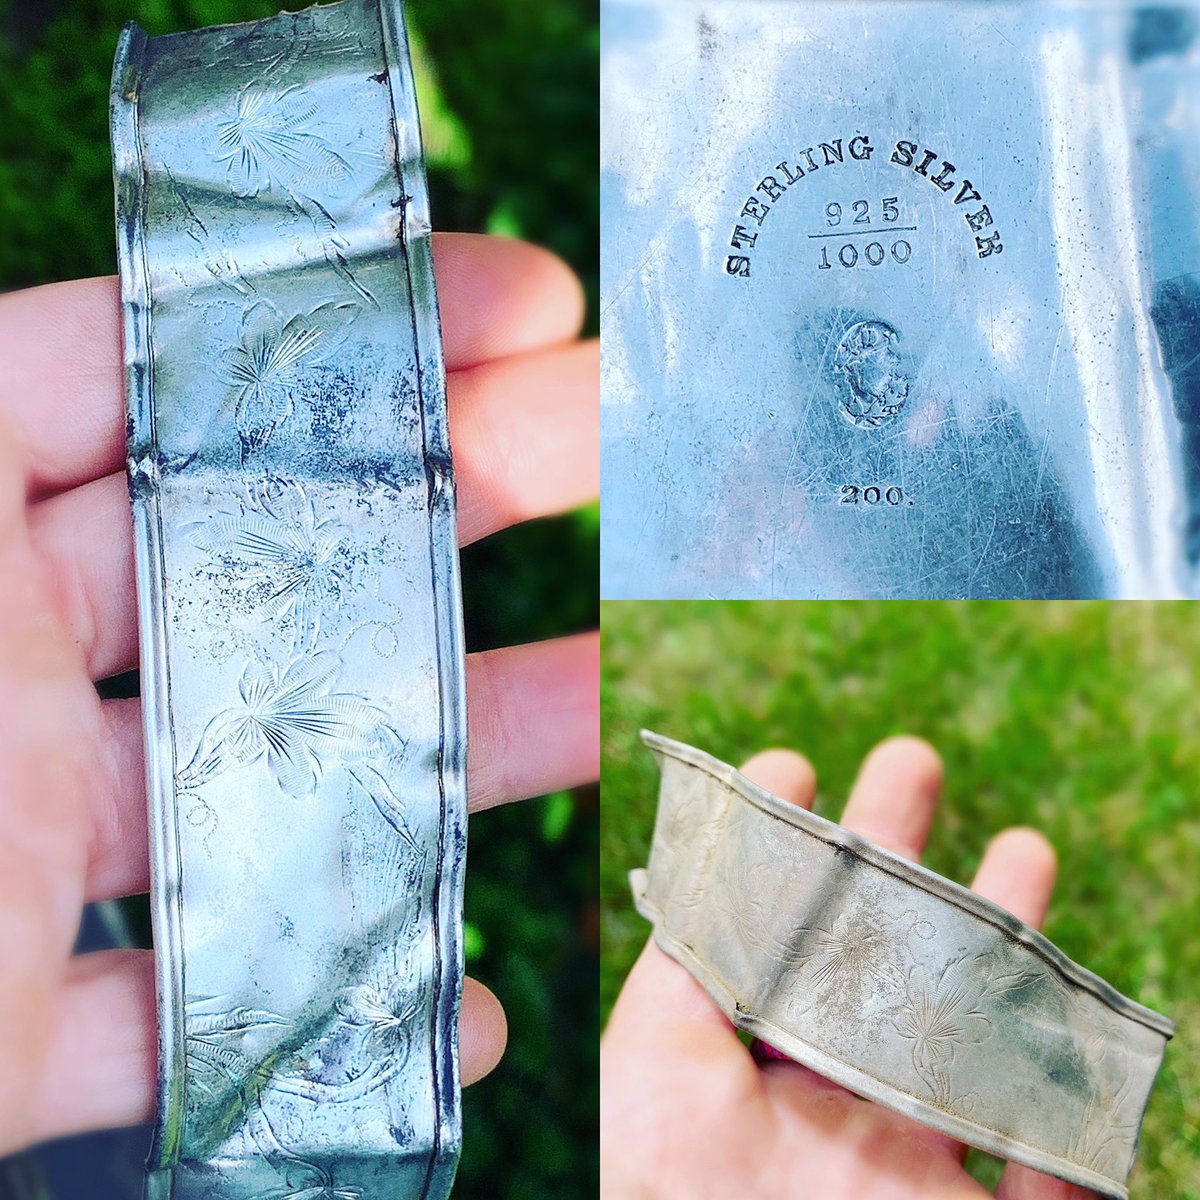 Whoa!! What a big piece of sterling silver!!
Love this!! 
I believe it’s a napkin ring. 
💙💚💙
#metaldetecting #napkinrings #sterlingsilver #vintagesilver #dirtfishing #treasurehunting #whiteselectronics